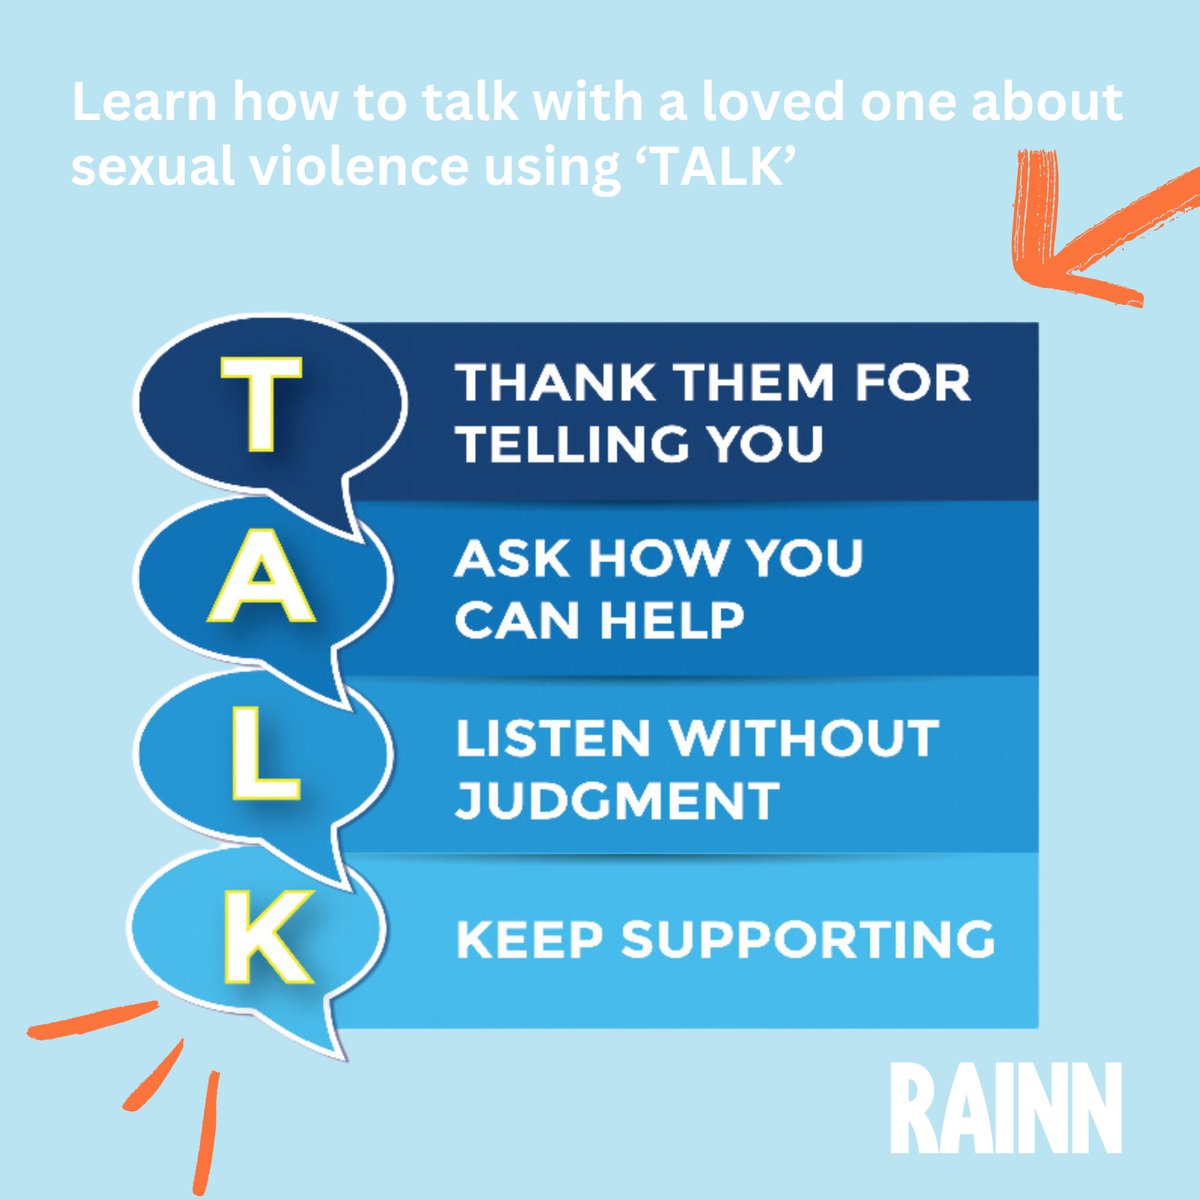 Grab your bestie, and let's yap about what's important. Mental health. 🗣️

👉 Swipe to learn how to 'TALK' with a loved one about sexual violence.

#mentalhealthmonth #aapiheritagemonth #mentalhealthawarenessmonth #mentalhealthmatters #aapi #mentalhealth